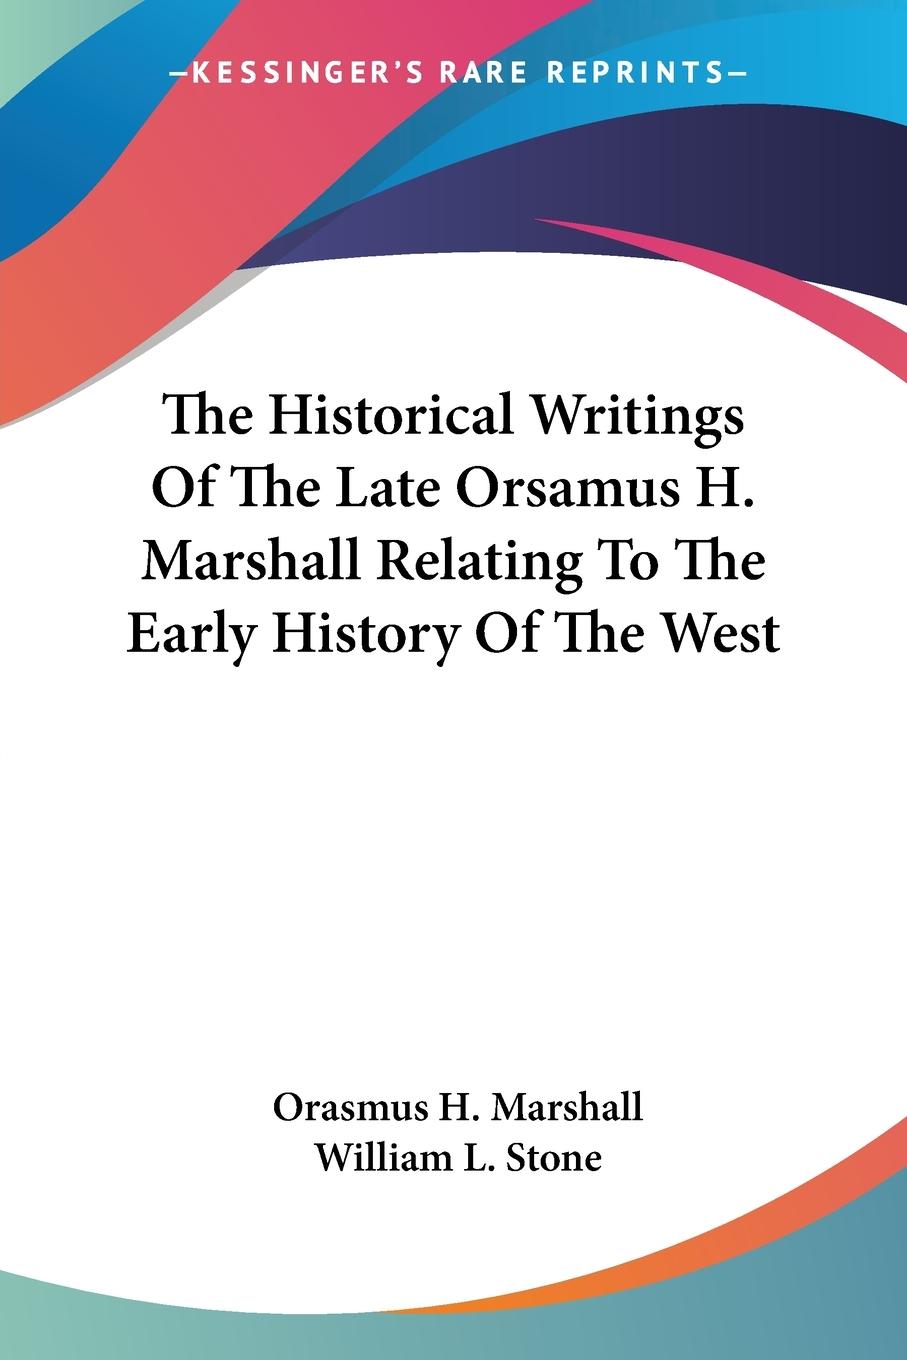 The Historical Writings Of The Late Orsamus H. Marshall Relating To The Early History Of The West - Marshall, Orasmus H.